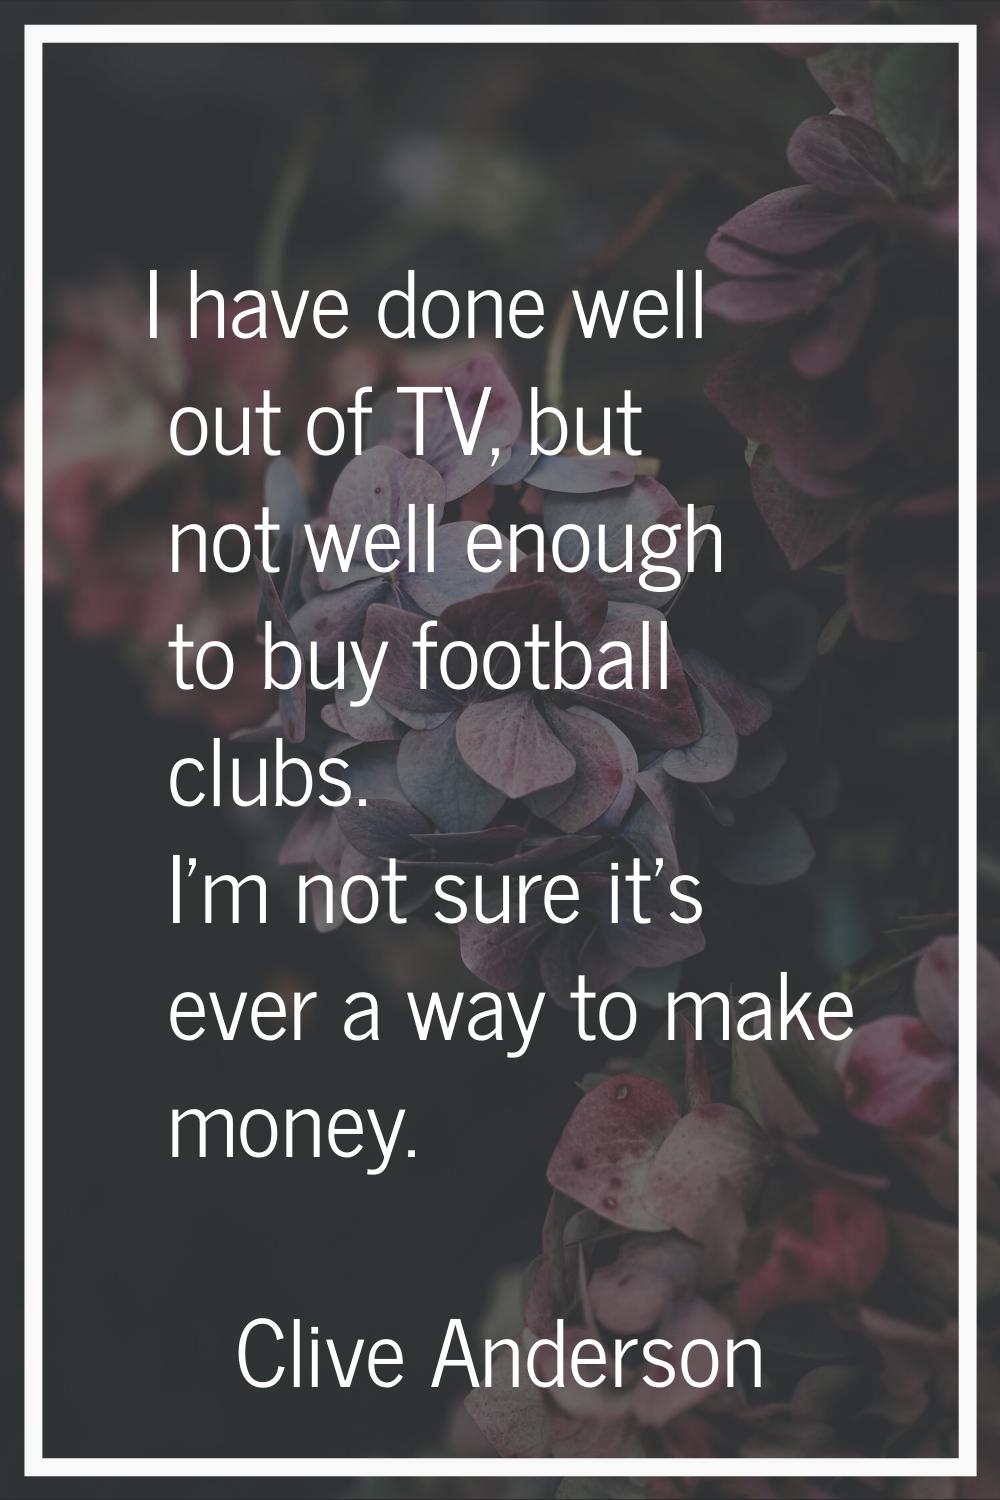 I have done well out of TV, but not well enough to buy football clubs. I'm not sure it's ever a way